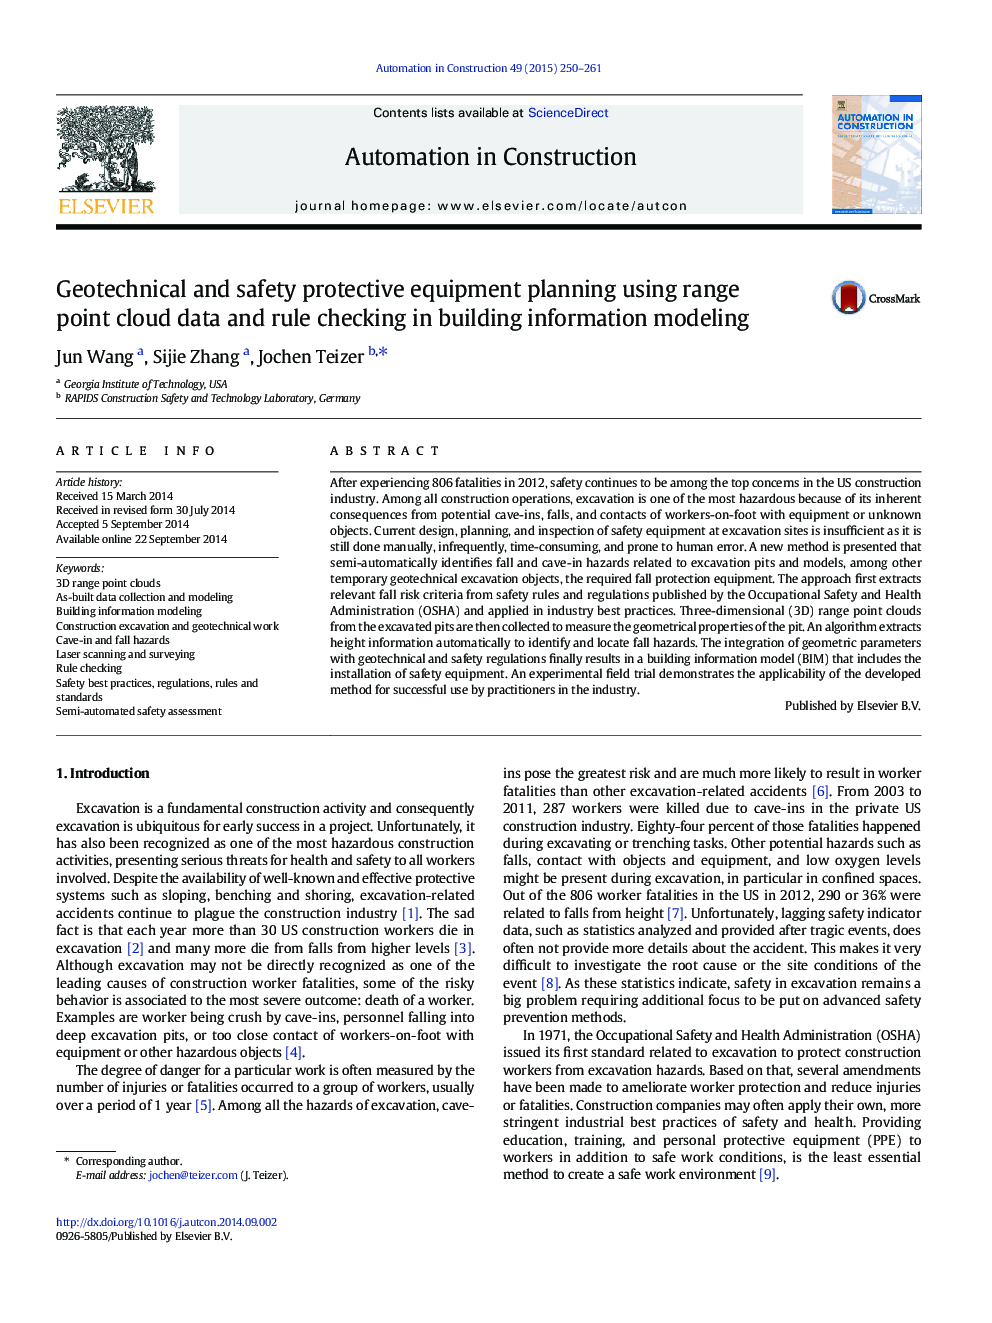 Geotechnical and safety protective equipment planning using range point cloud data and rule checking in building information modeling